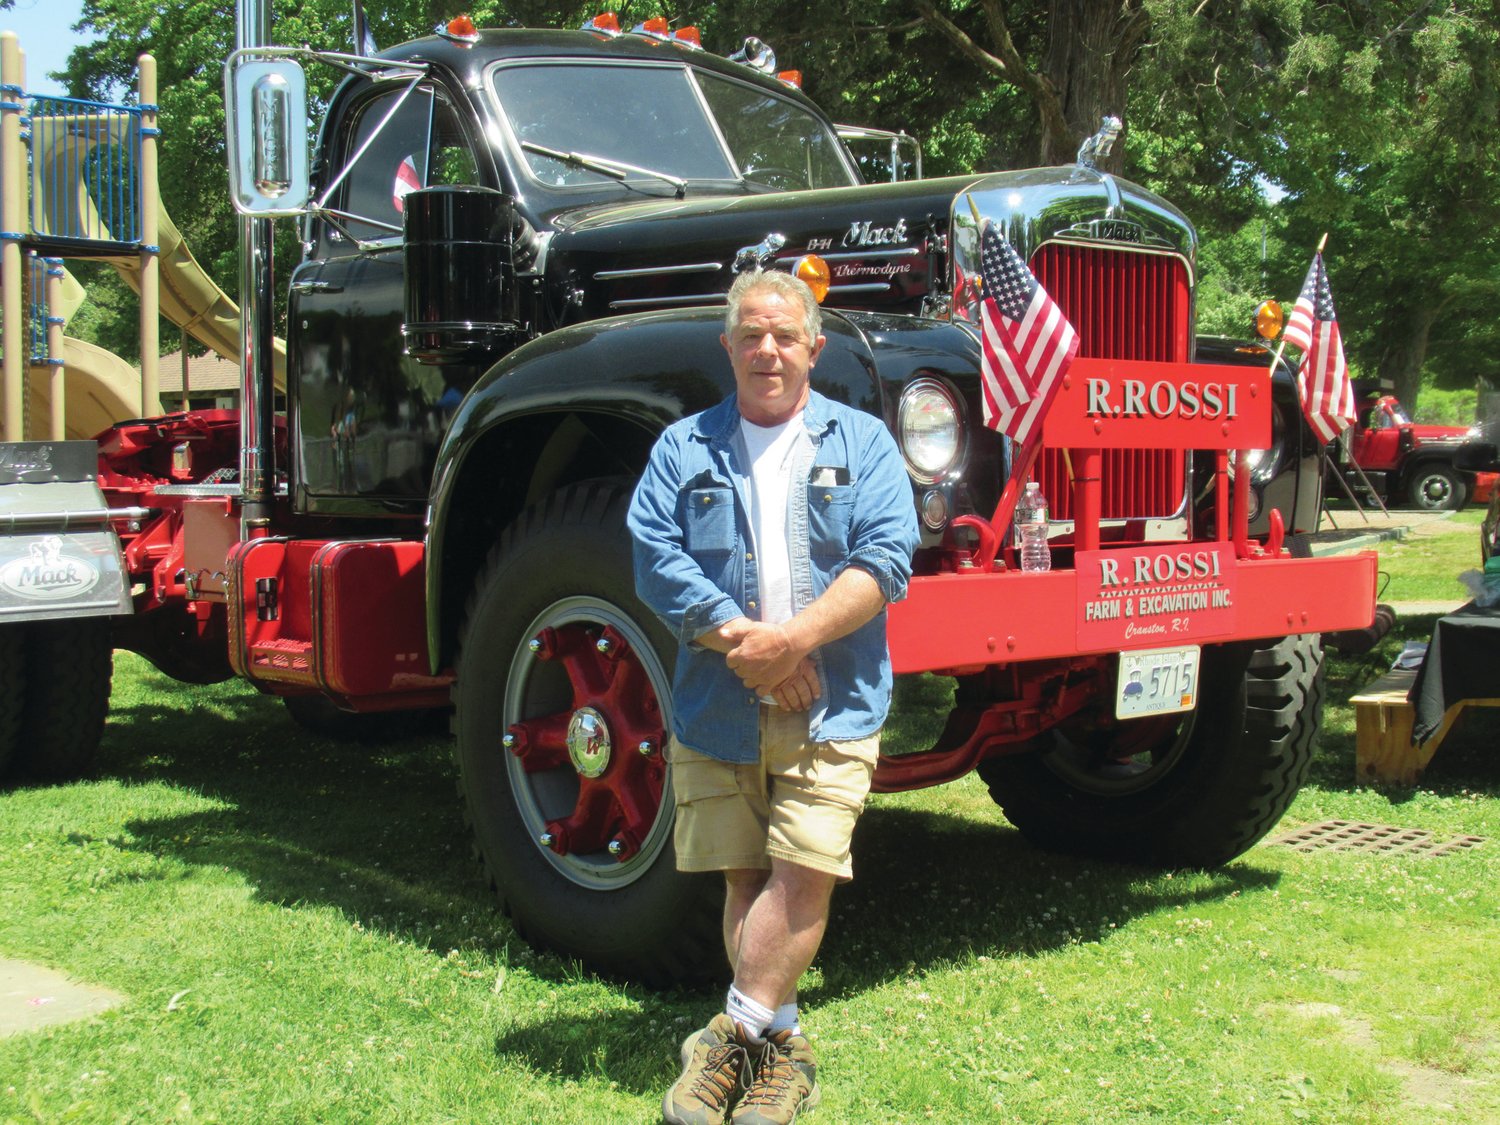 PRESIDENT’S PRIDE: Ron Rossi, president of the Ocean State Vintage Haulers, enjoys a lighter moment next to his huge truck that was among the 77 vintage vehicles that on display at Sunday’s 28th Annual Antique Truck Show inside Johnston War Memorial Park.